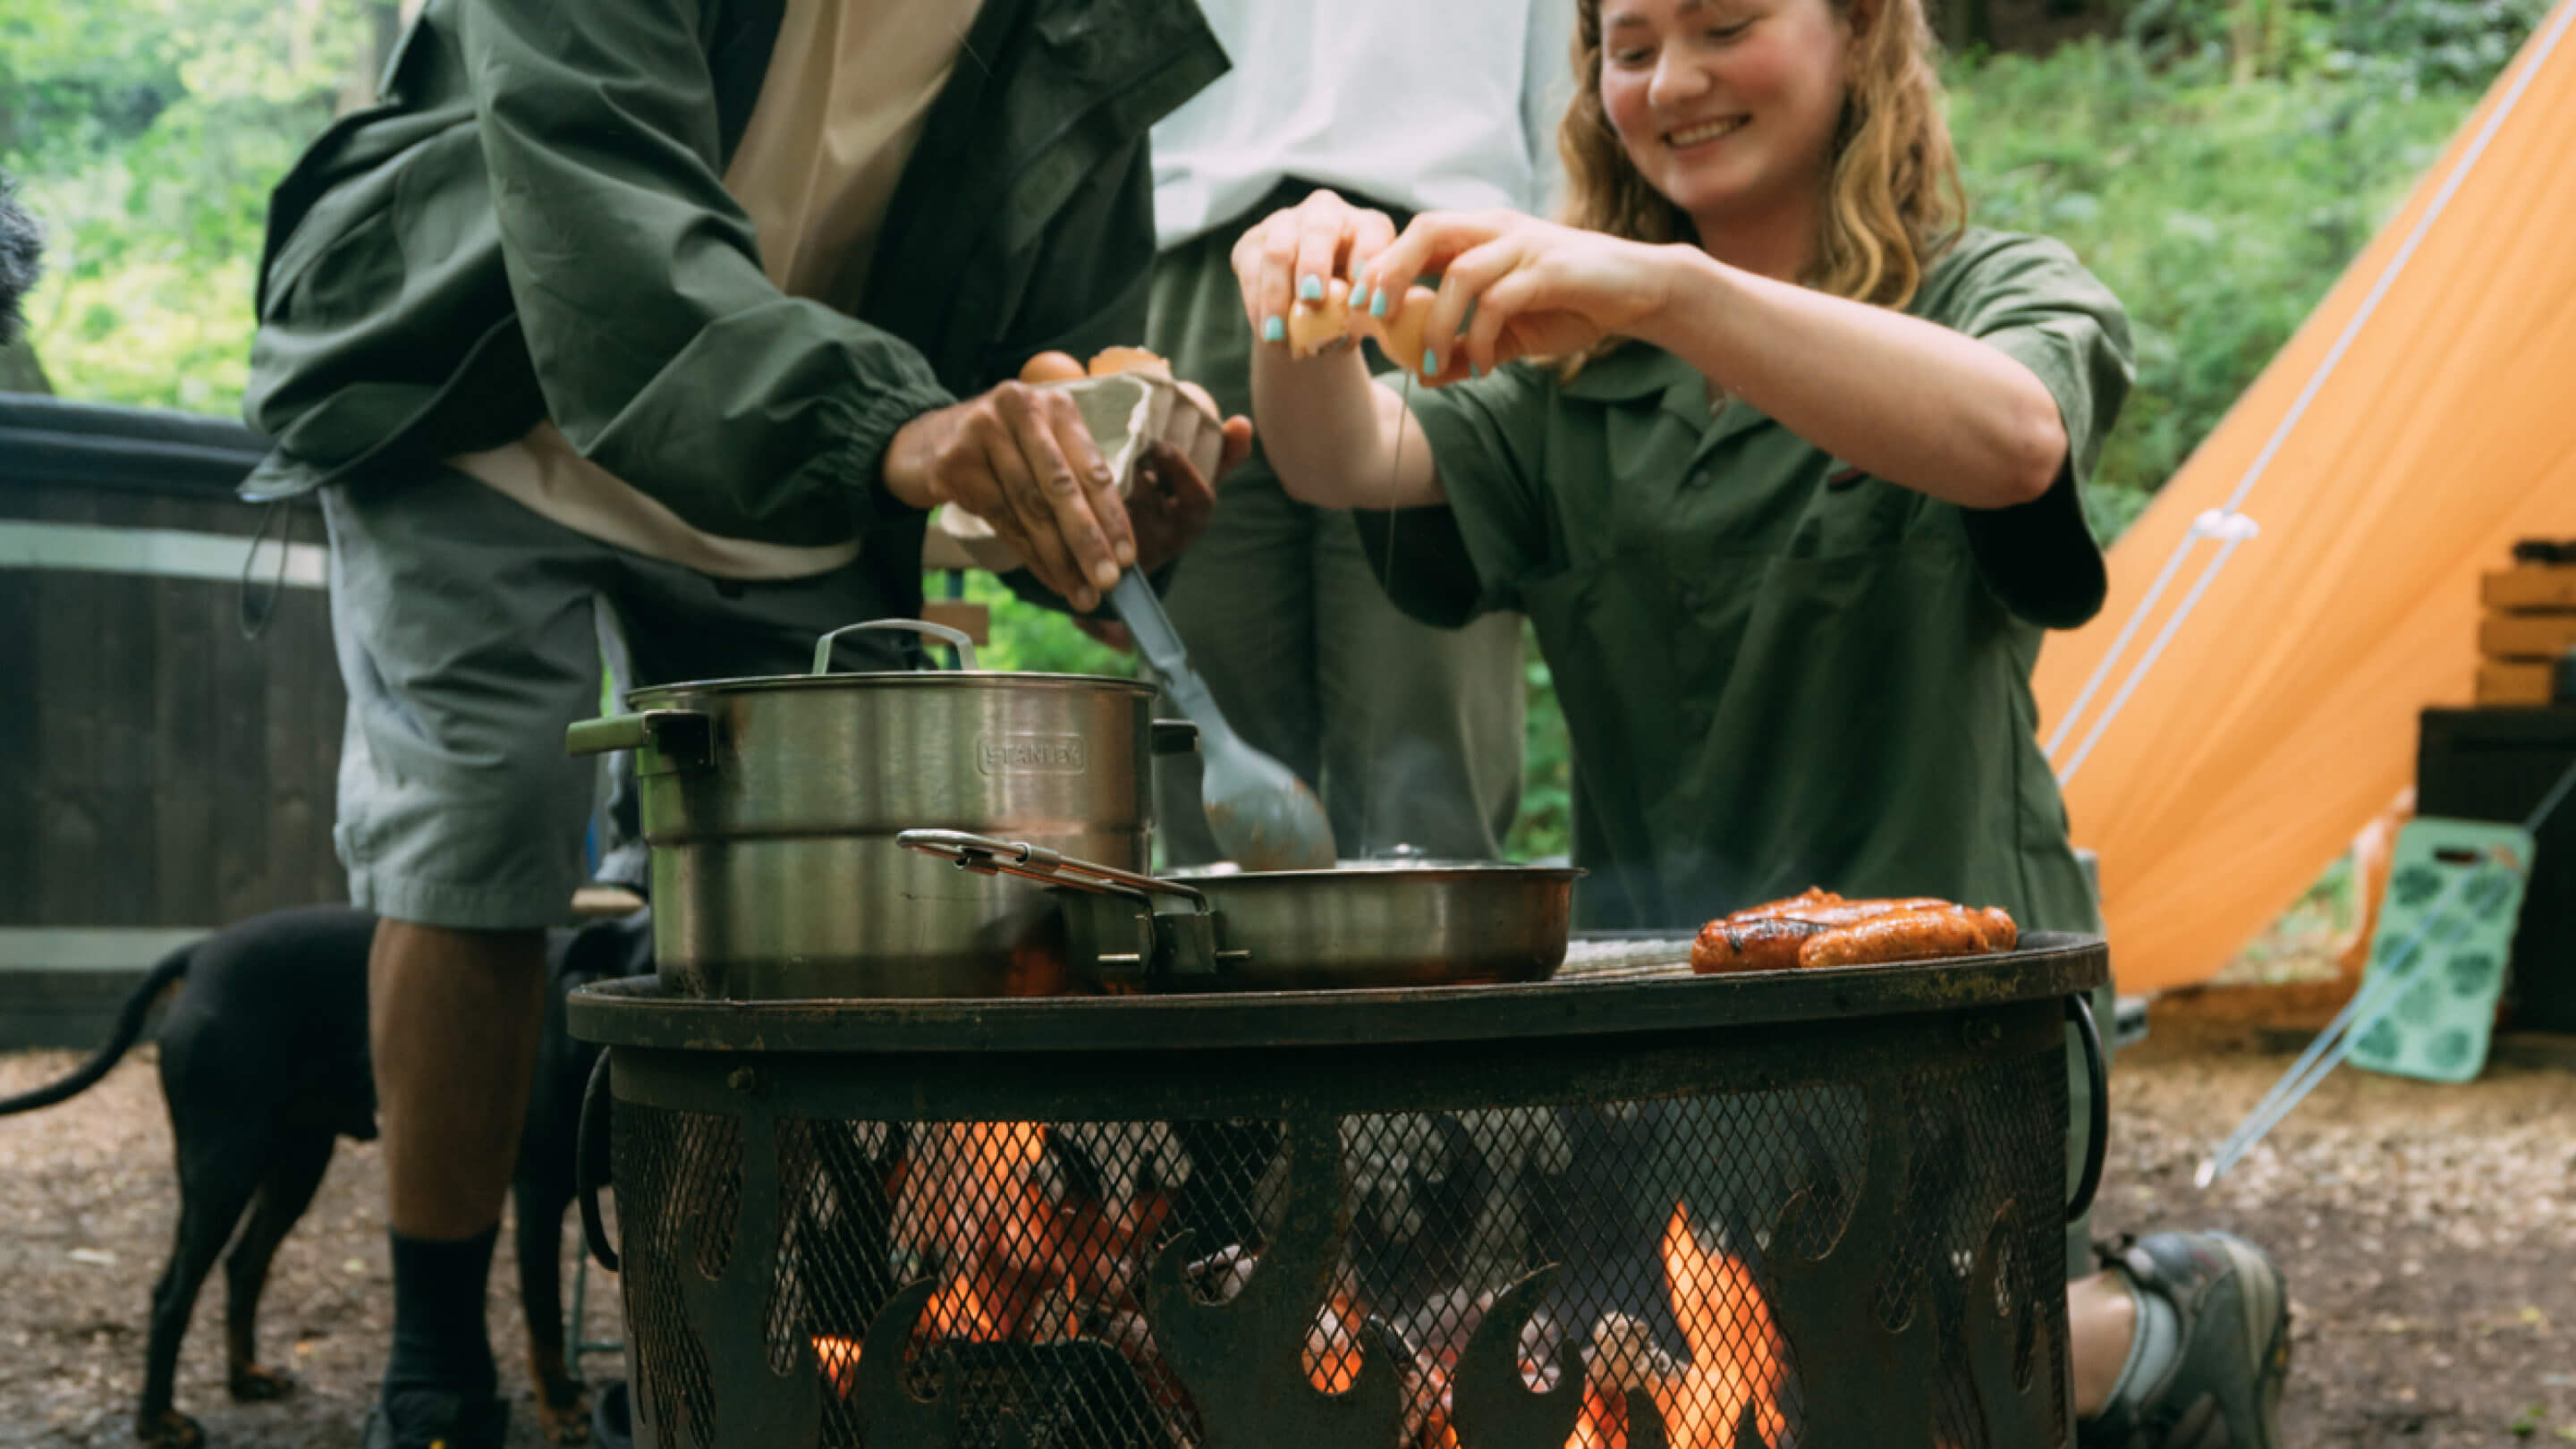 How To Prepare a Camp Cook Kit